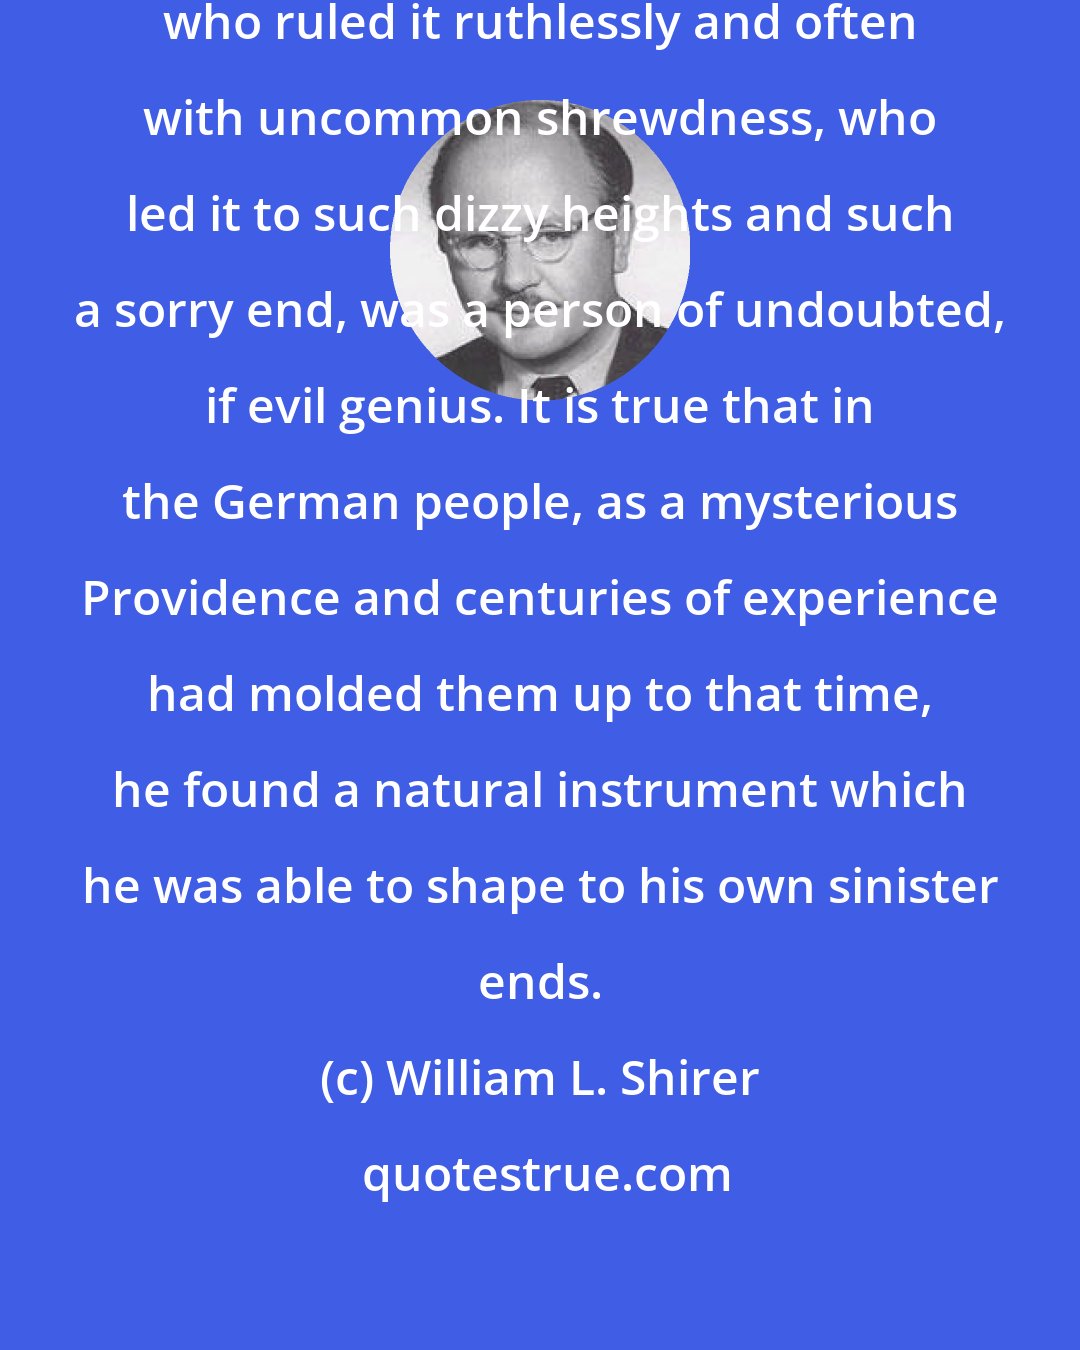 William L. Shirer: Hitler, who founded the Third Reich, who ruled it ruthlessly and often with uncommon shrewdness, who led it to such dizzy heights and such a sorry end, was a person of undoubted, if evil genius. It is true that in the German people, as a mysterious Providence and centuries of experience had molded them up to that time, he found a natural instrument which he was able to shape to his own sinister ends.